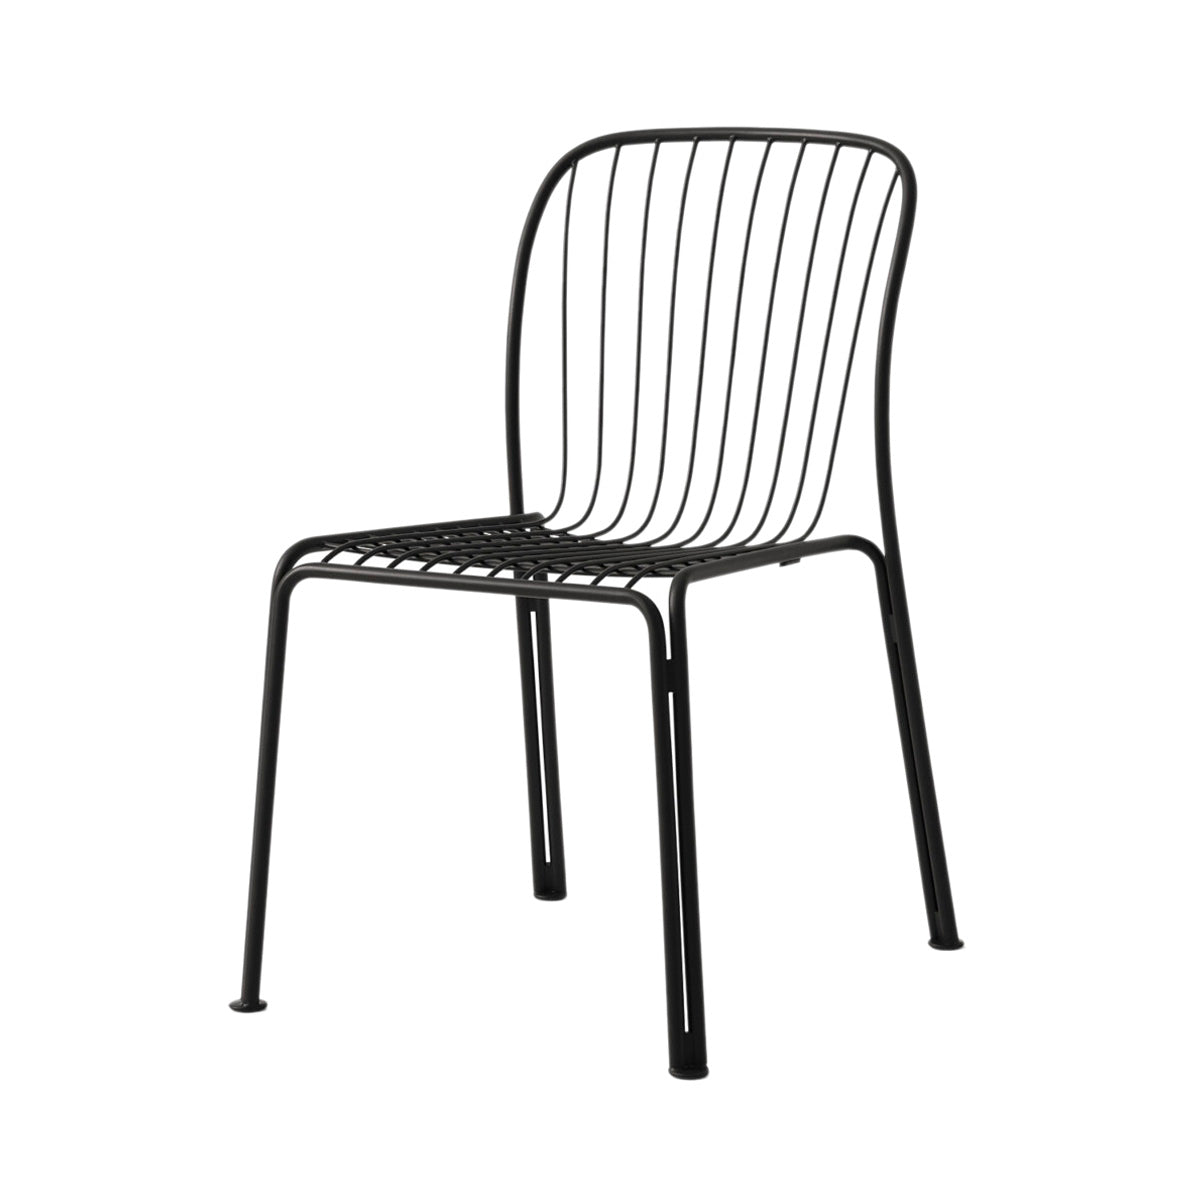 Thorvald SC94 Side Chair: Outdoor + Warm Black + Without Cushion